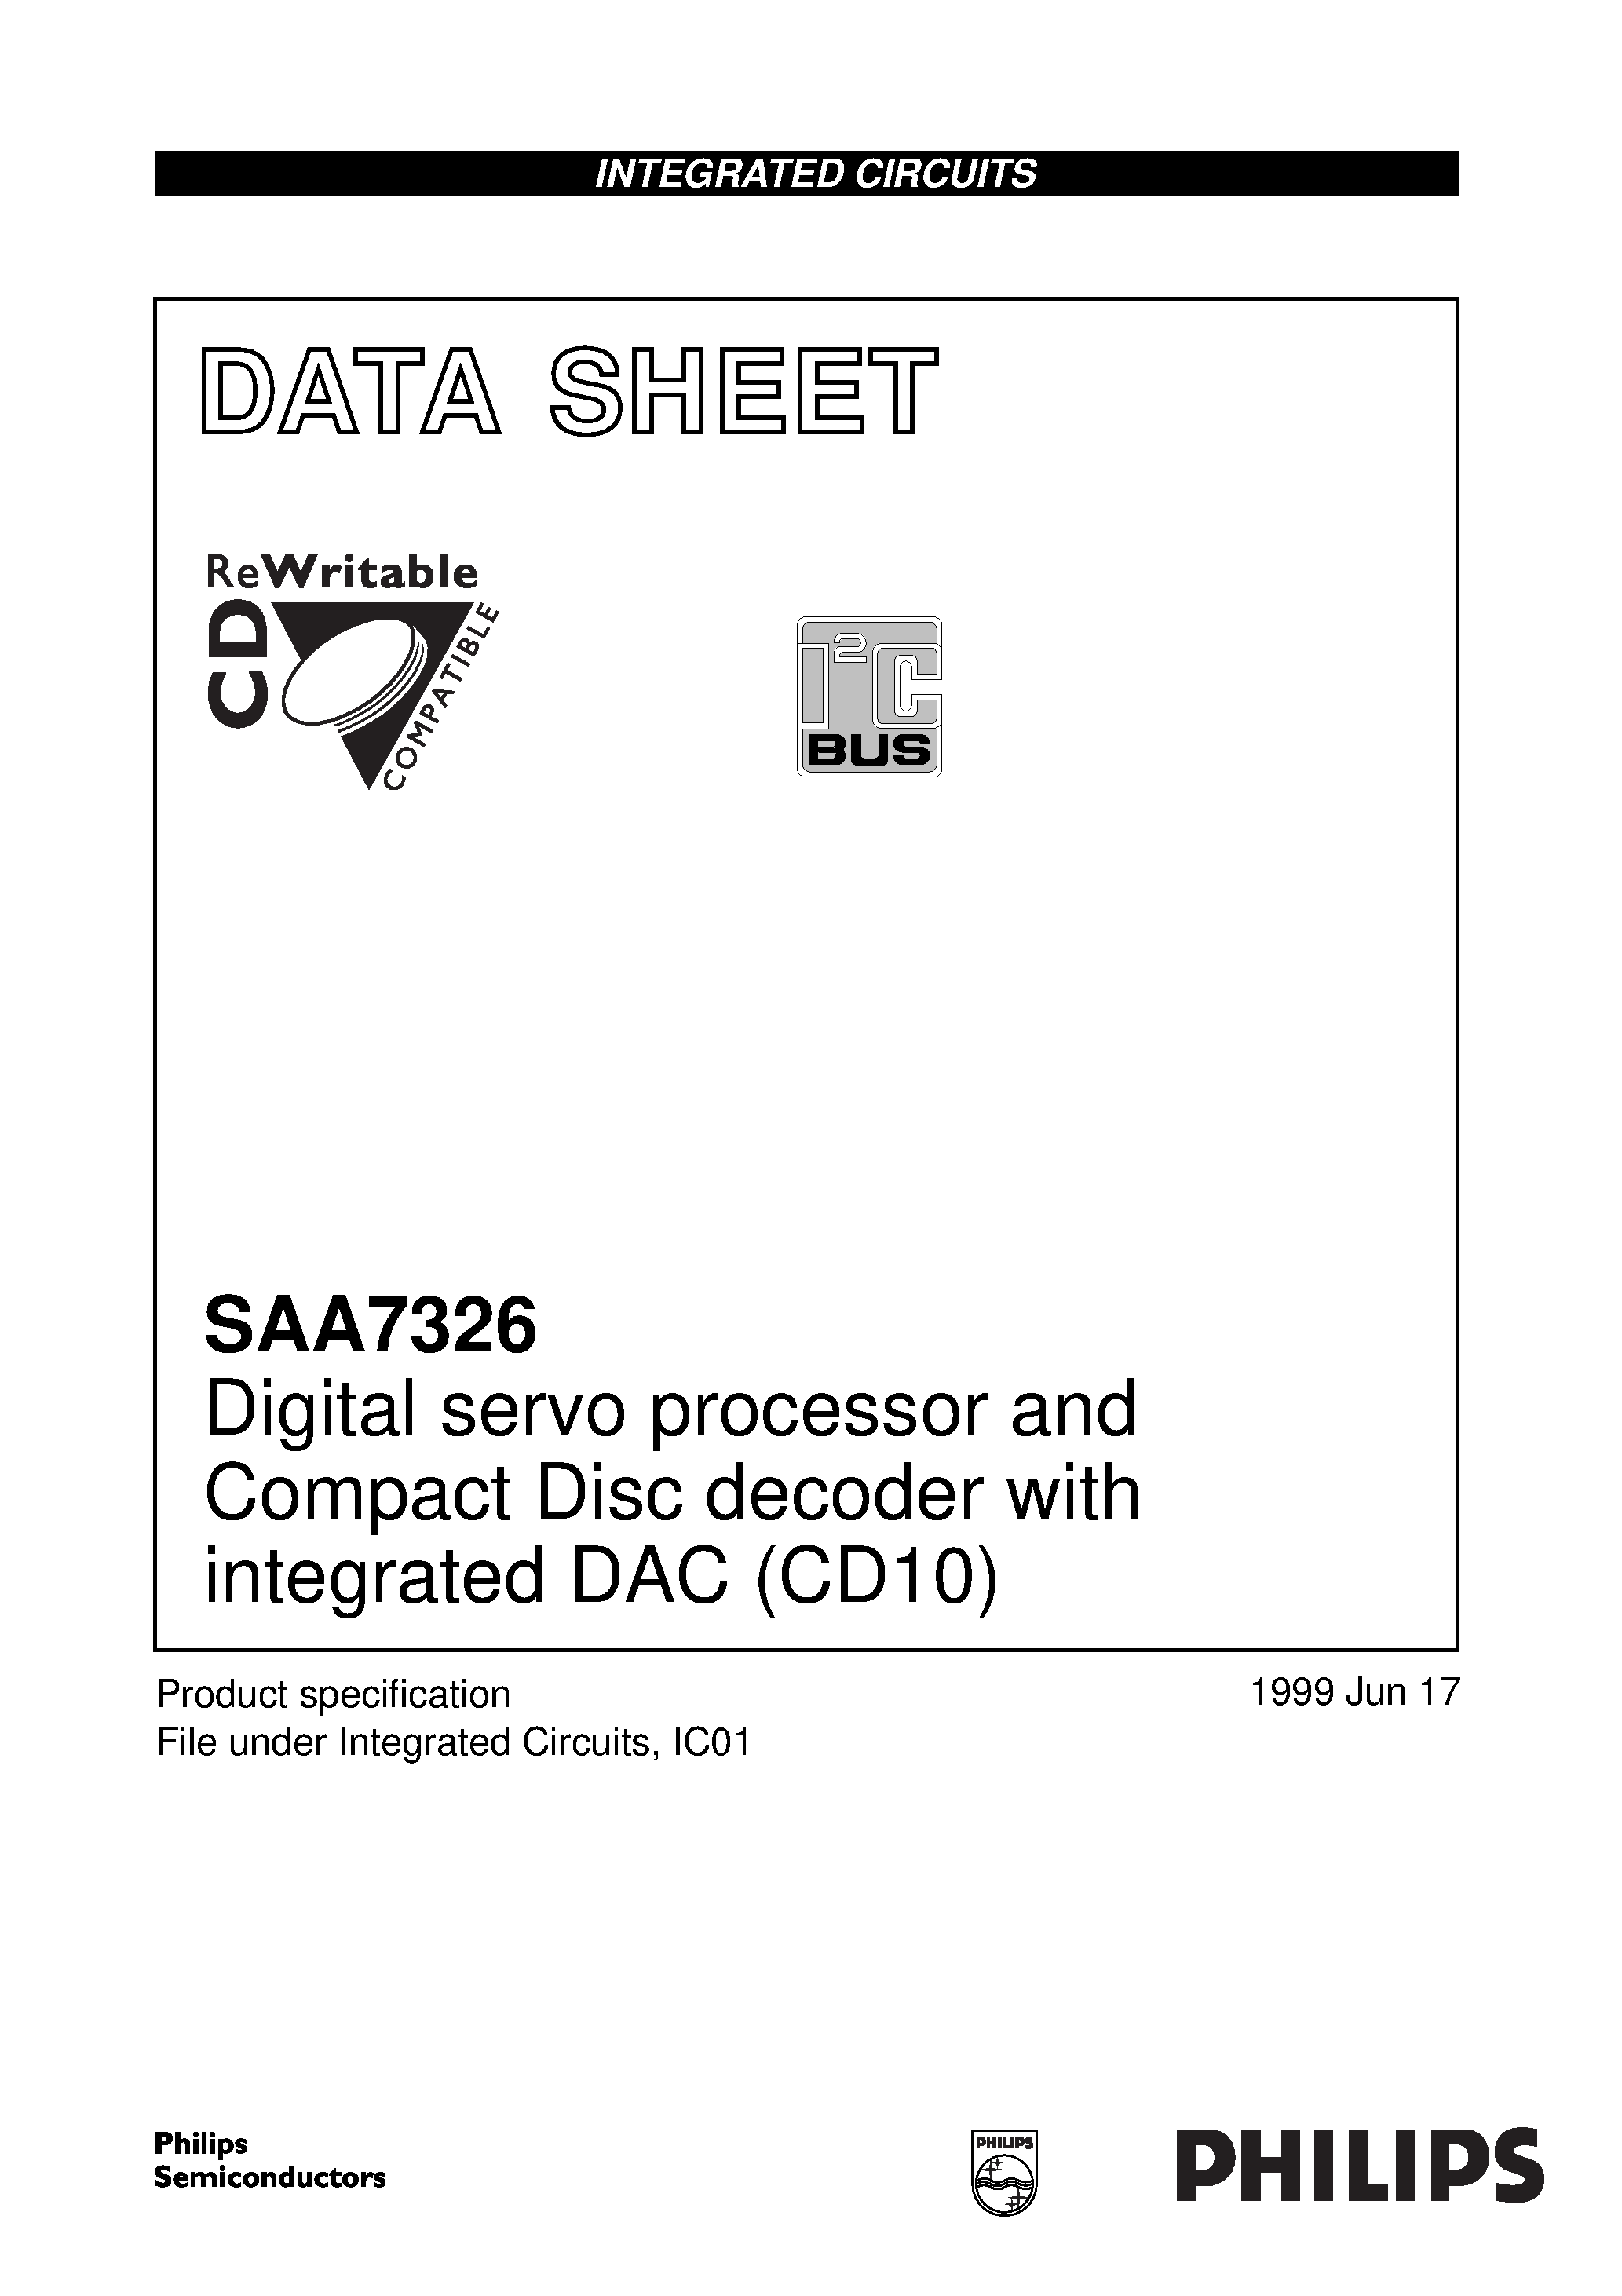 Datasheet SAA7326 - Digital servo processor and Compact Disc decoder with integrated DAC CD10 page 1